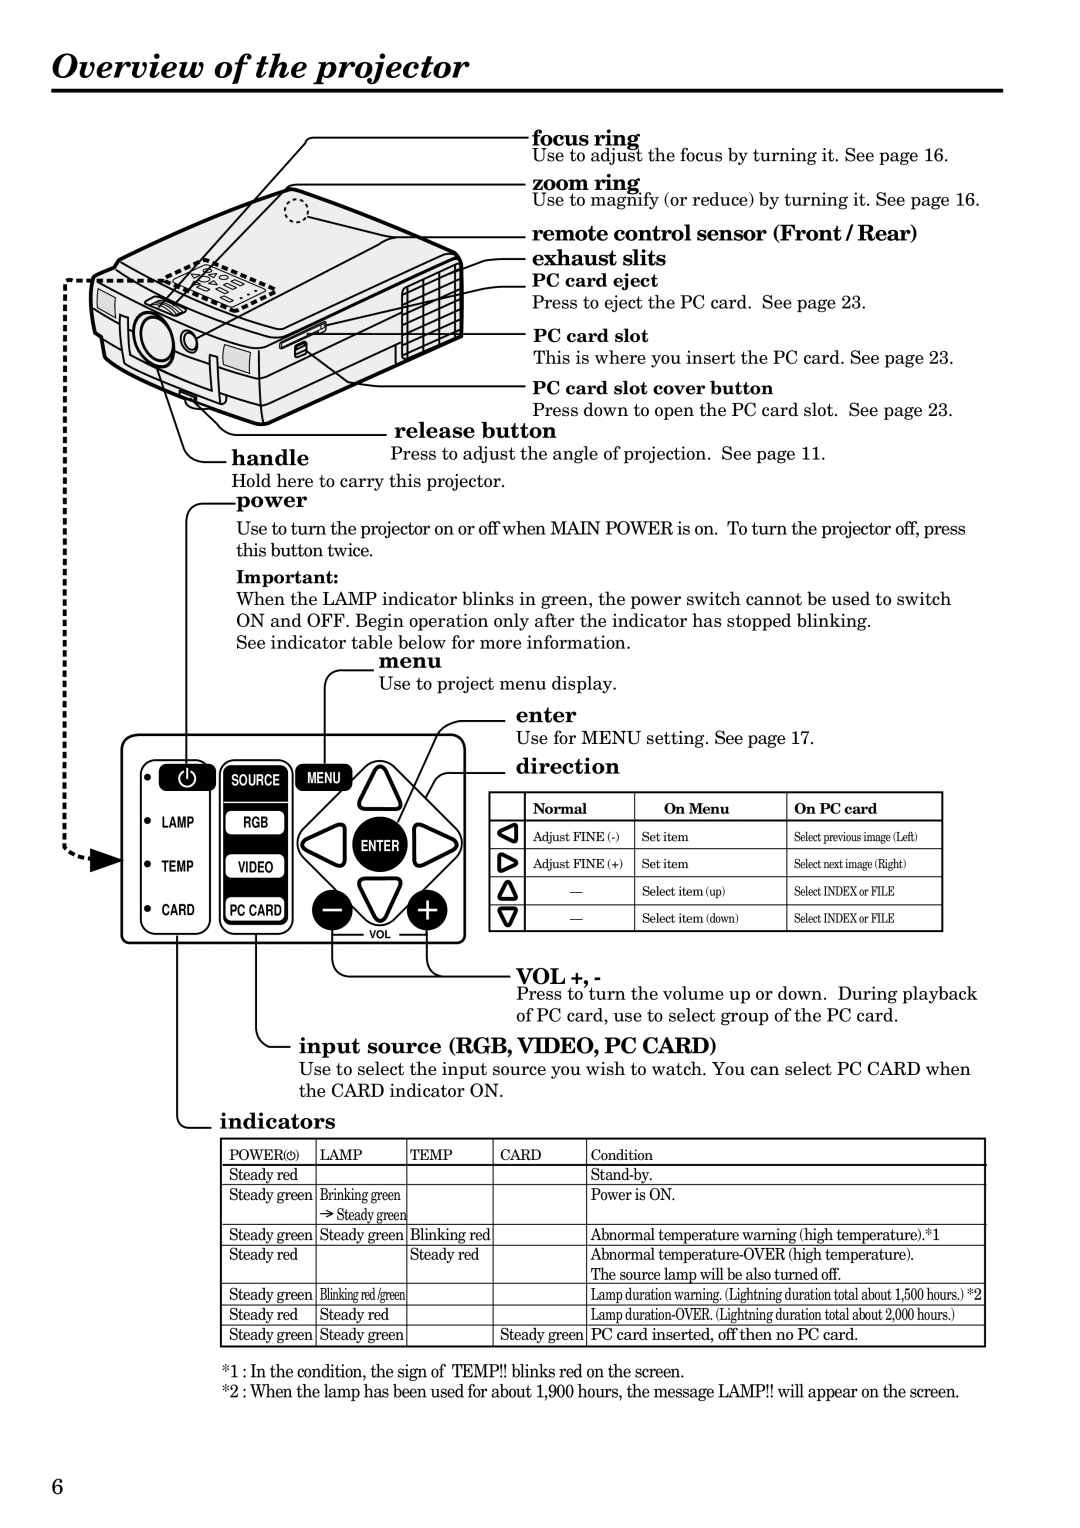 Mitsubishi Electronics LVP-S120A user manual Overview of the projector 